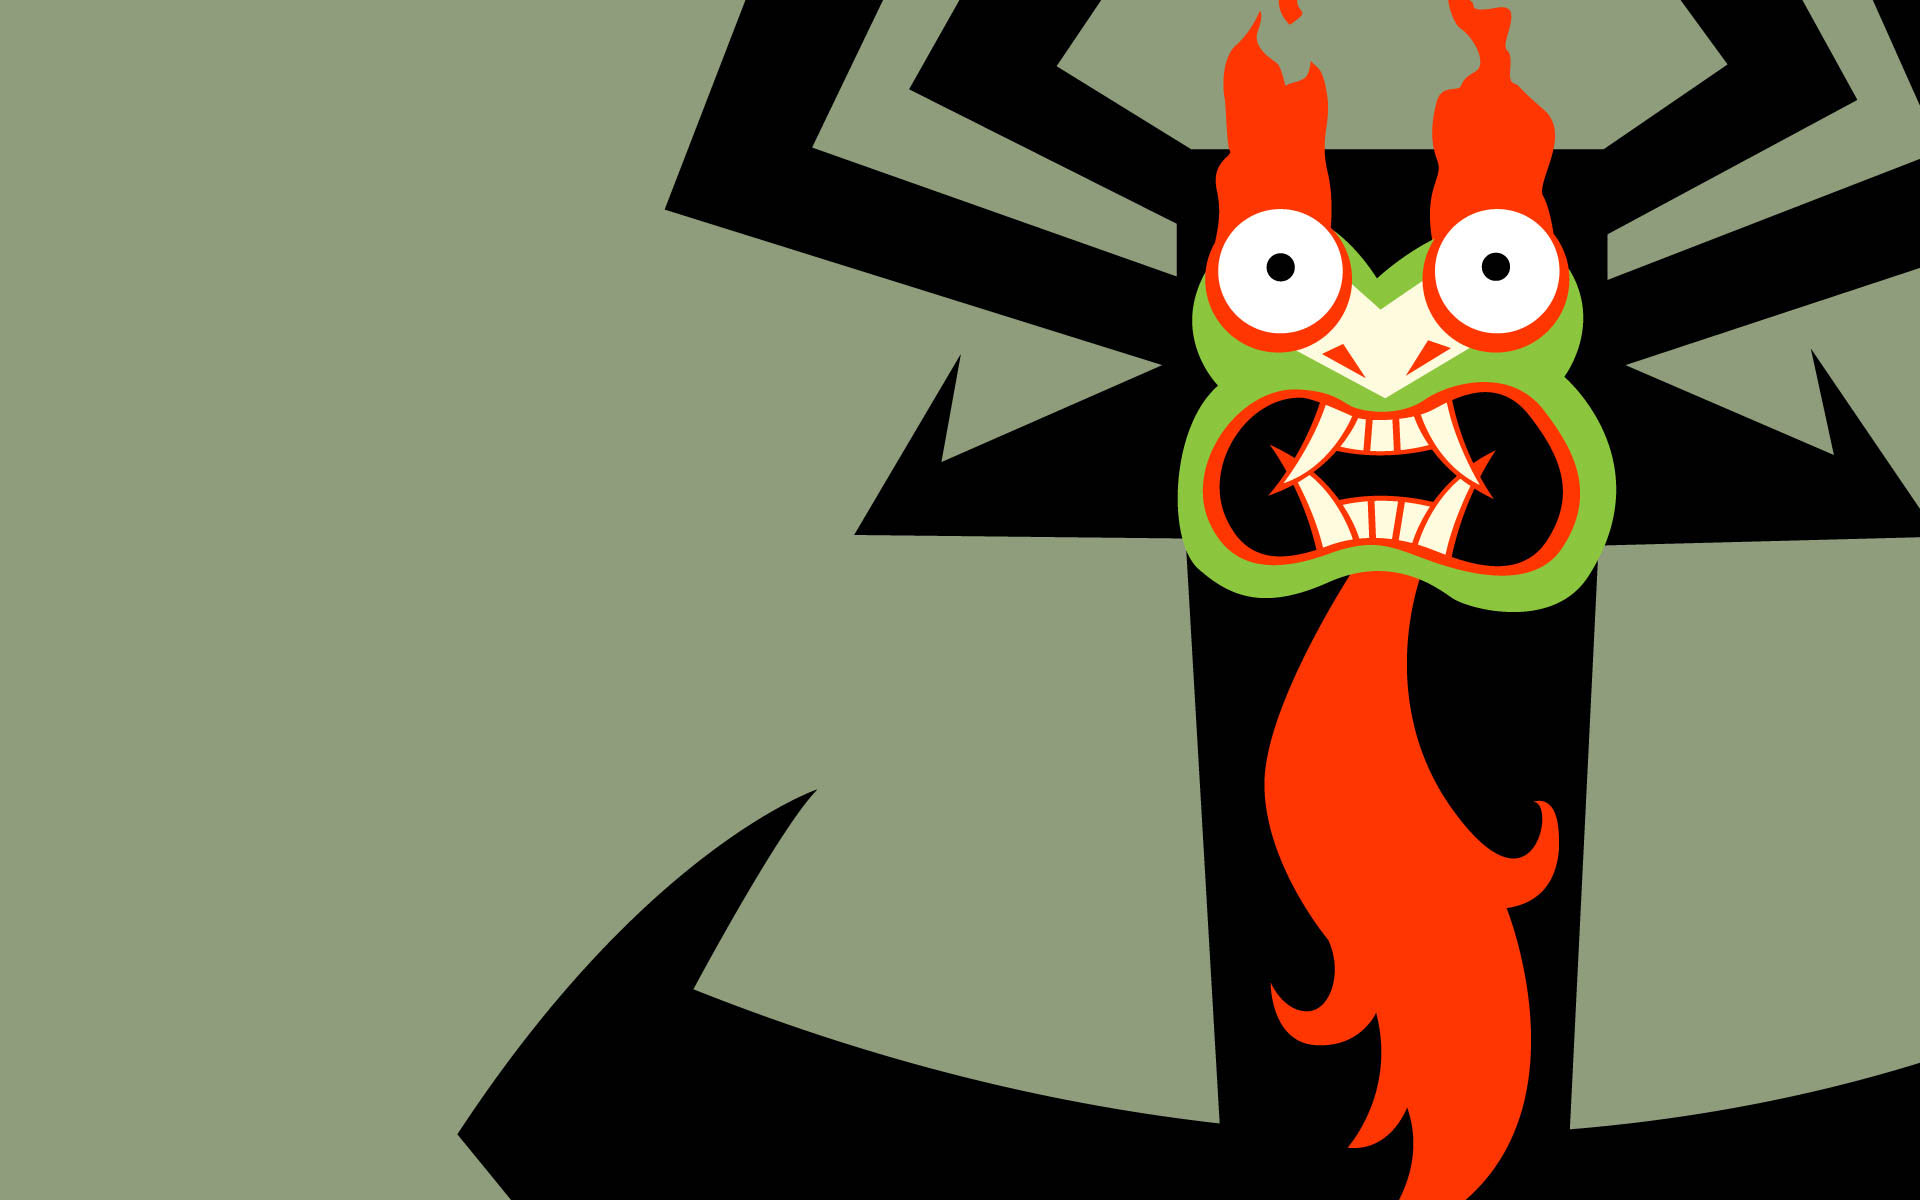 Samurai Jack Wallpaper Image In High Quality All HD